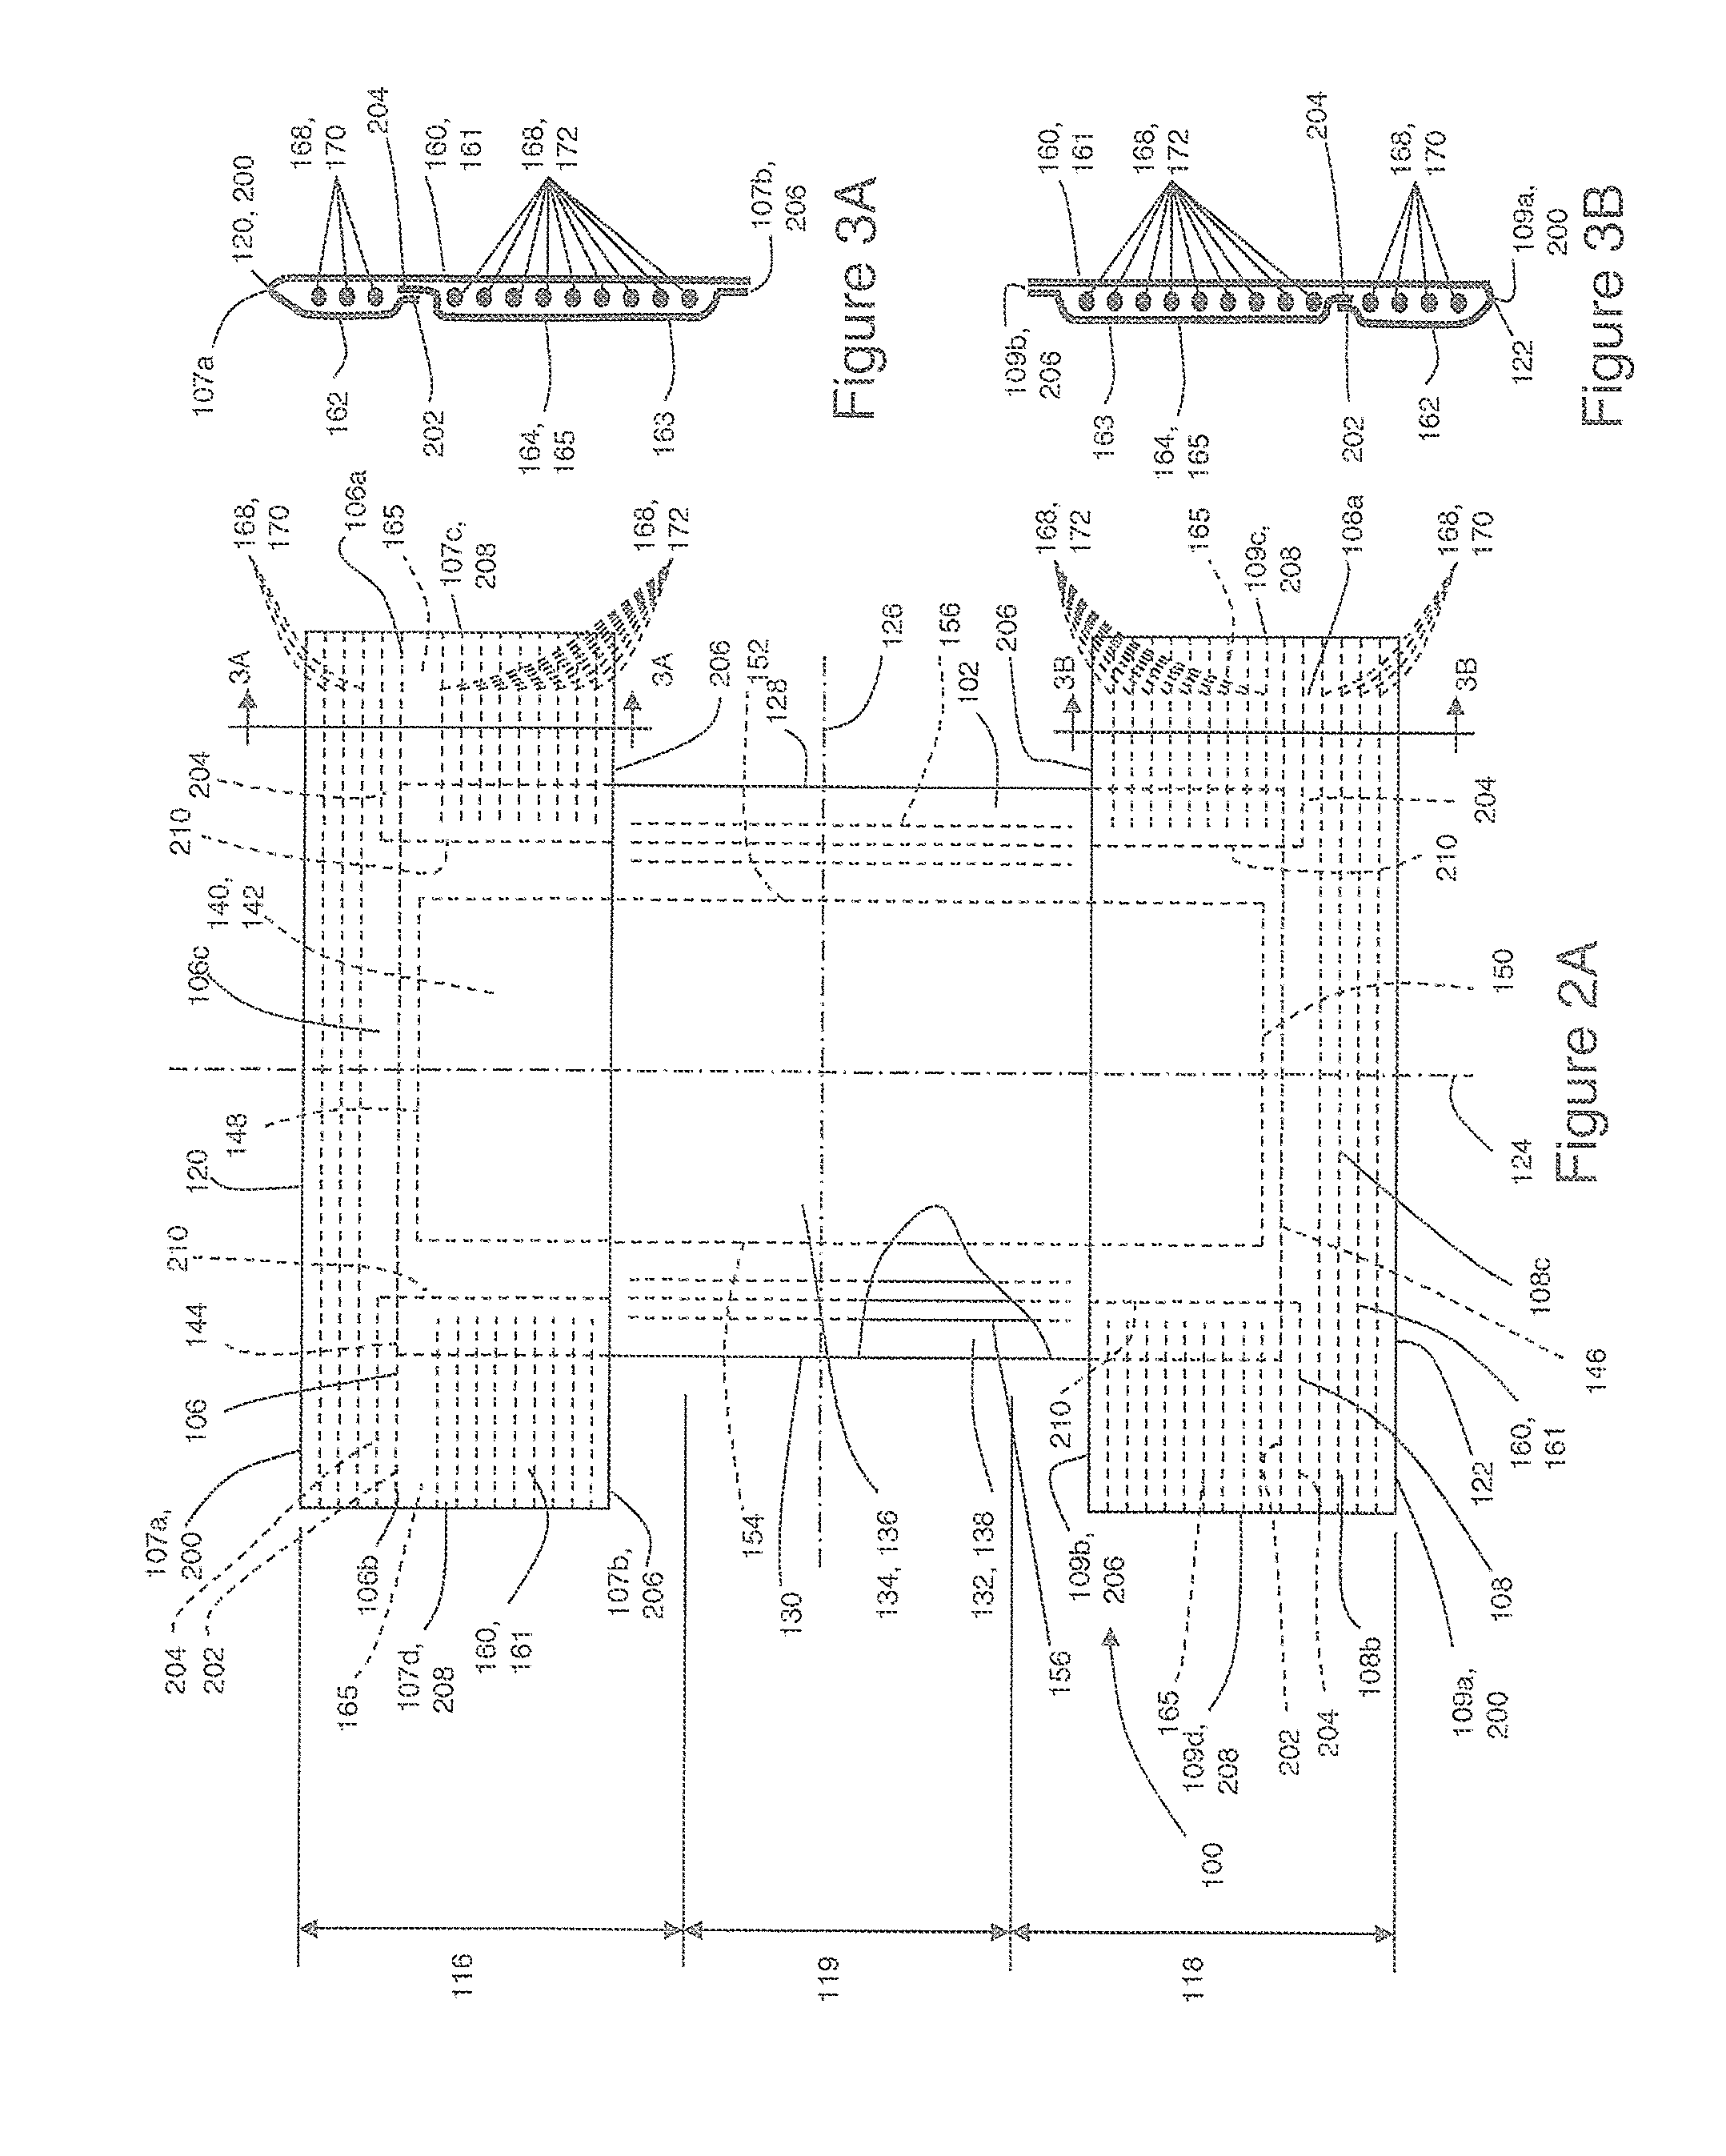 Apparatuses and Methods for Making Absorbent Articles